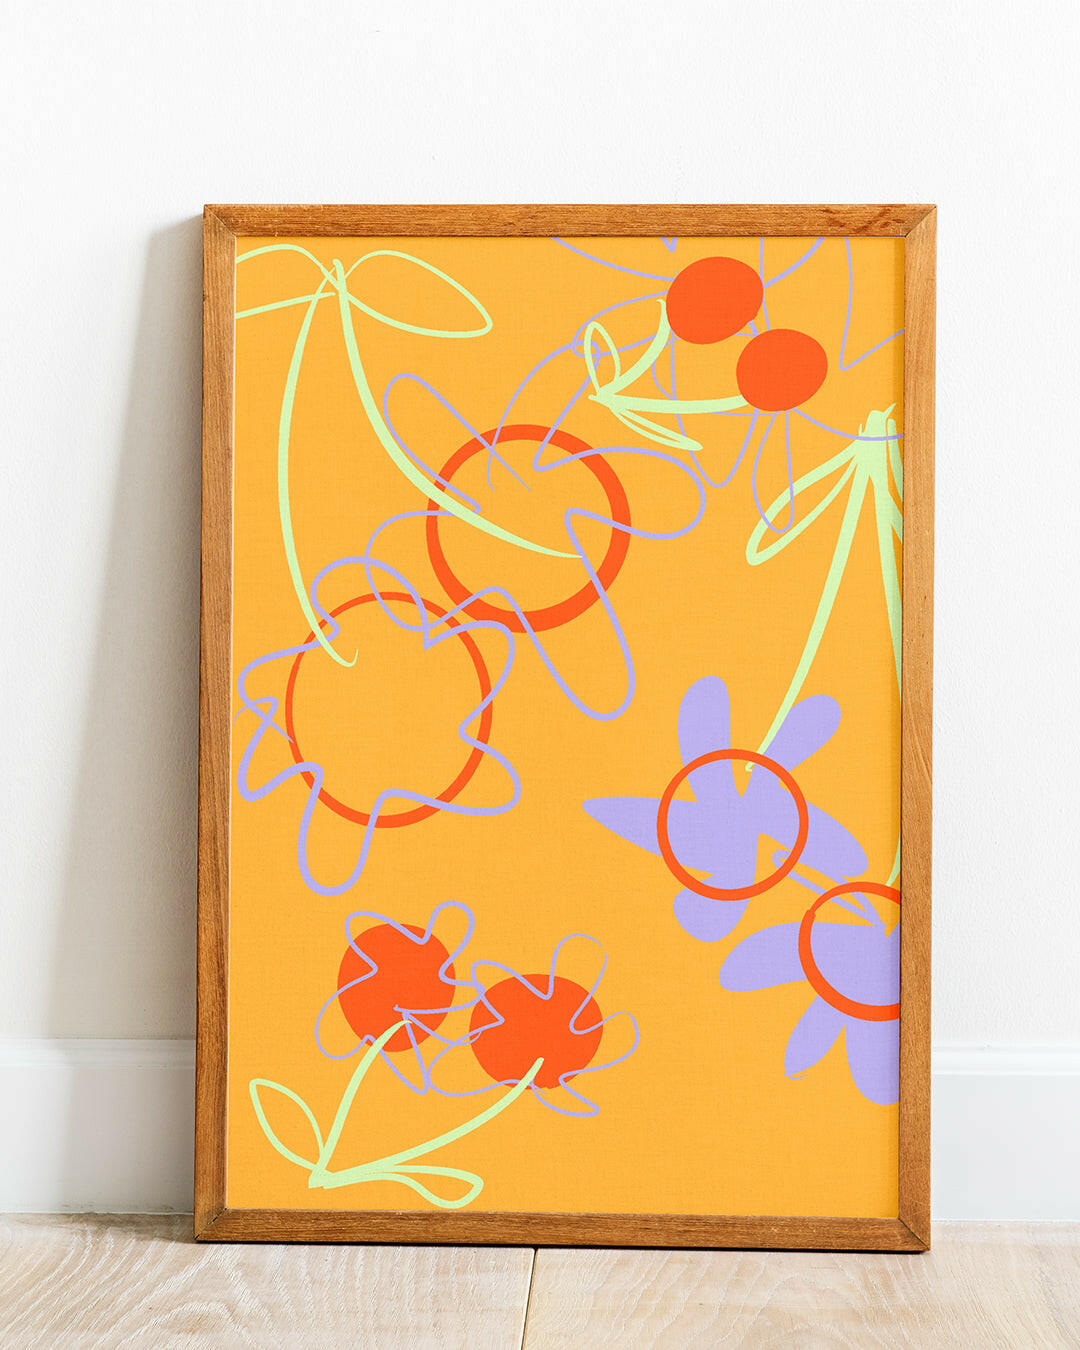 Wall art of an abstract cherry and flower design by eclectic homeware brand Jubi NYC.